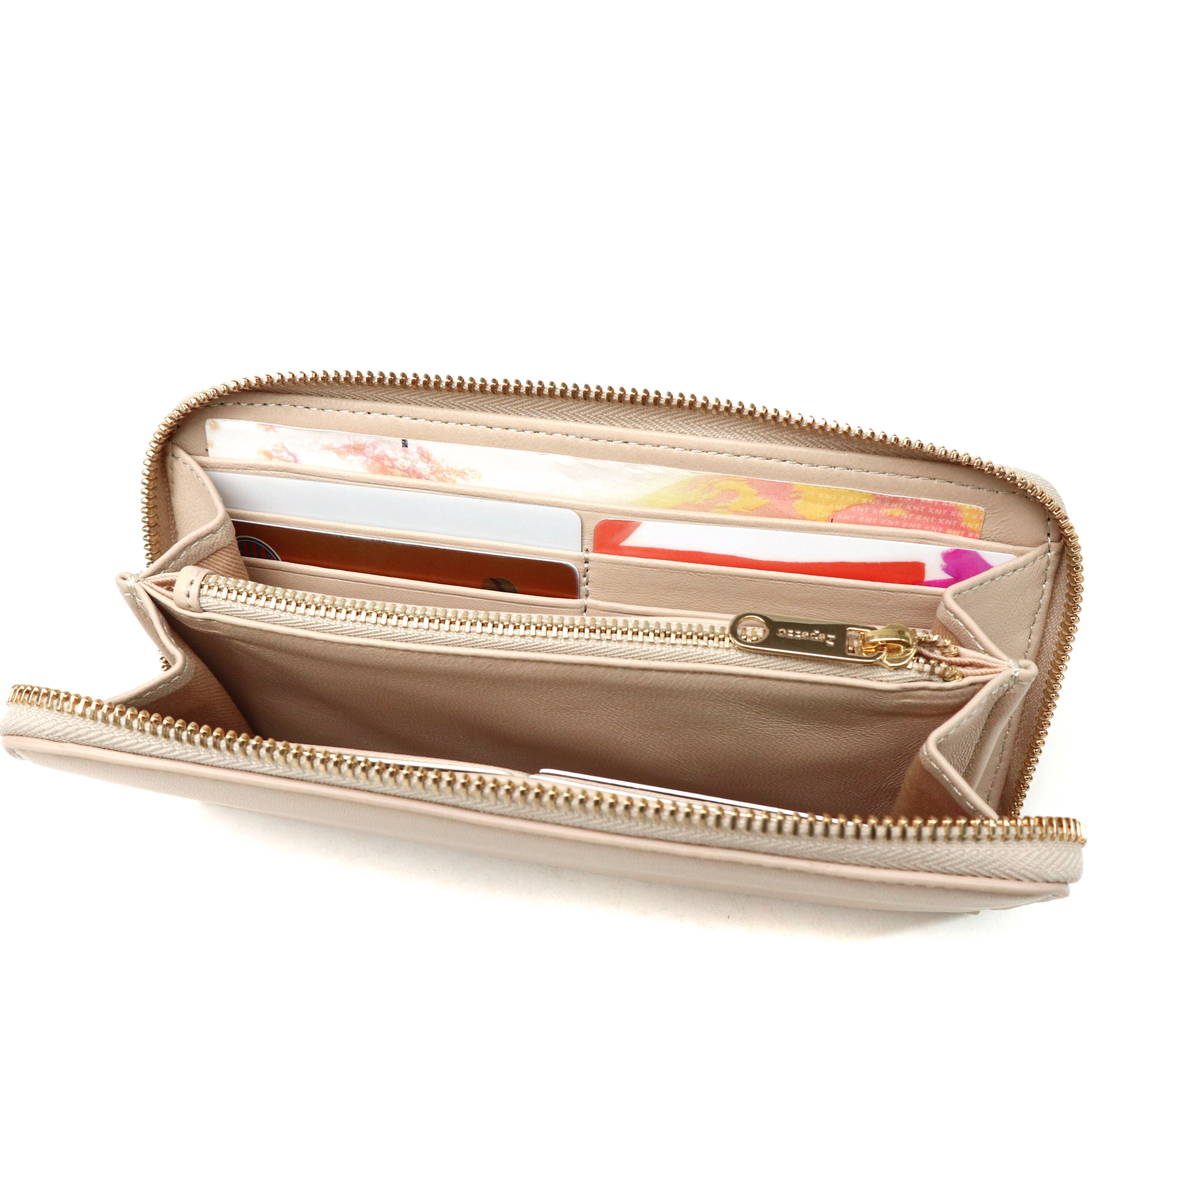 Repetto レペット Zippered wallet 長財布｜【正規販売店】カバン